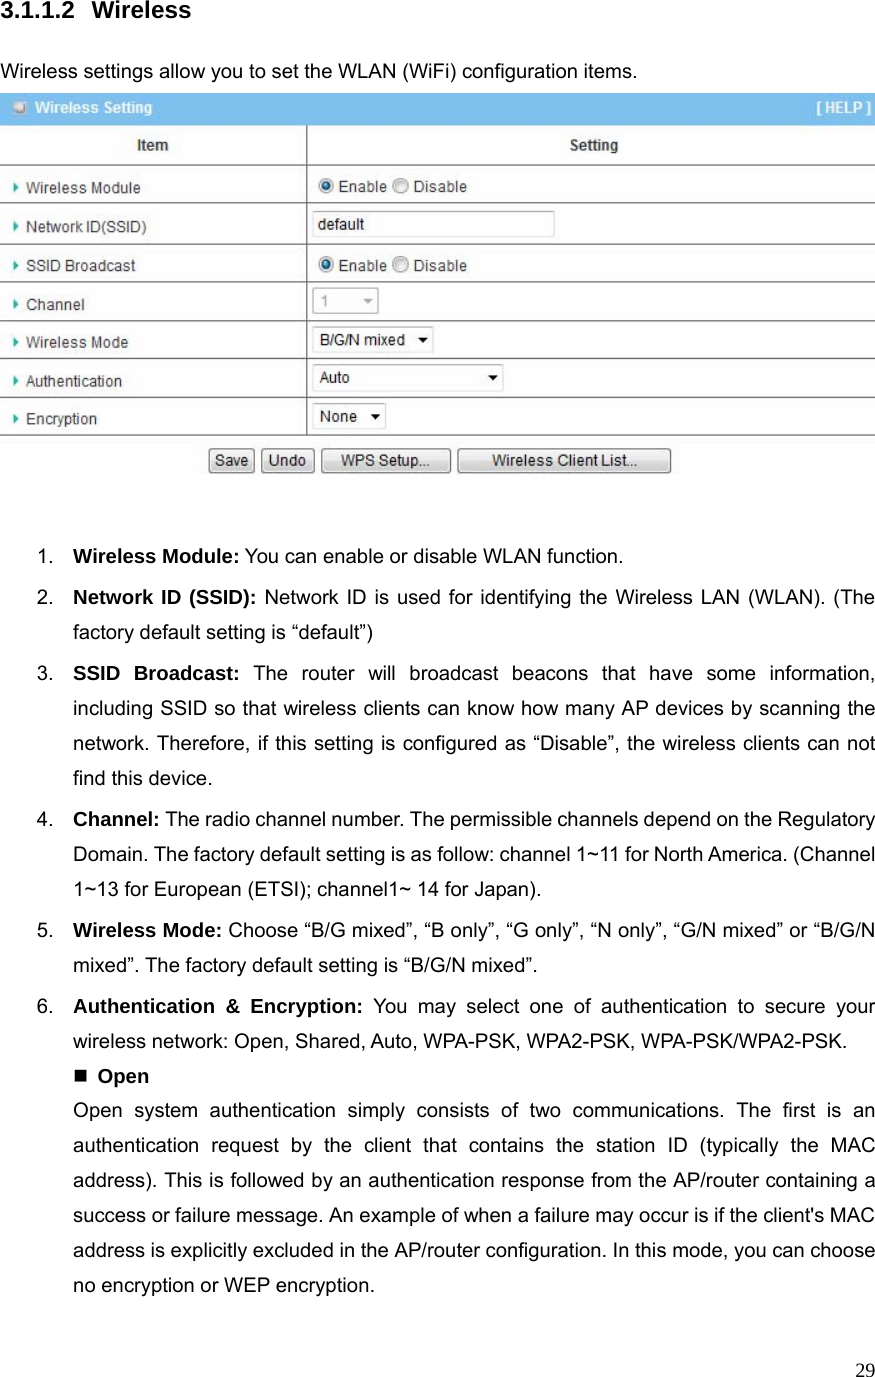  293.1.1.2 Wireless  Wireless settings allow you to set the WLAN (WiFi) configuration items.    1.  Wireless Module: You can enable or disable WLAN function. 2.  Network ID (SSID): Network ID is used for identifying the Wireless LAN (WLAN). (The factory default setting is “default”) 3.  SSID Broadcast: The router will broadcast beacons that have some information, including SSID so that wireless clients can know how many AP devices by scanning the network. Therefore, if this setting is configured as “Disable”, the wireless clients can not find this device. 4.  Channel: The radio channel number. The permissible channels depend on the Regulatory Domain. The factory default setting is as follow: channel 1~11 for North America. (Channel 1~13 for European (ETSI); channel1~ 14 for Japan). 5.  Wireless Mode: Choose “B/G mixed”, “B only”, “G only”, “N only”, “G/N mixed” or “B/G/N mixed”. The factory default setting is “B/G/N mixed”. 6.  Authentication &amp; Encryption: You may select one of authentication to secure your wireless network: Open, Shared, Auto, WPA-PSK, WPA2-PSK, WPA-PSK/WPA2-PSK.  Open Open system authentication simply consists of two communications. The first is an authentication request by the client that contains the station ID (typically the MAC address). This is followed by an authentication response from the AP/router containing a success or failure message. An example of when a failure may occur is if the client&apos;s MAC address is explicitly excluded in the AP/router configuration. In this mode, you can choose no encryption or WEP encryption. 